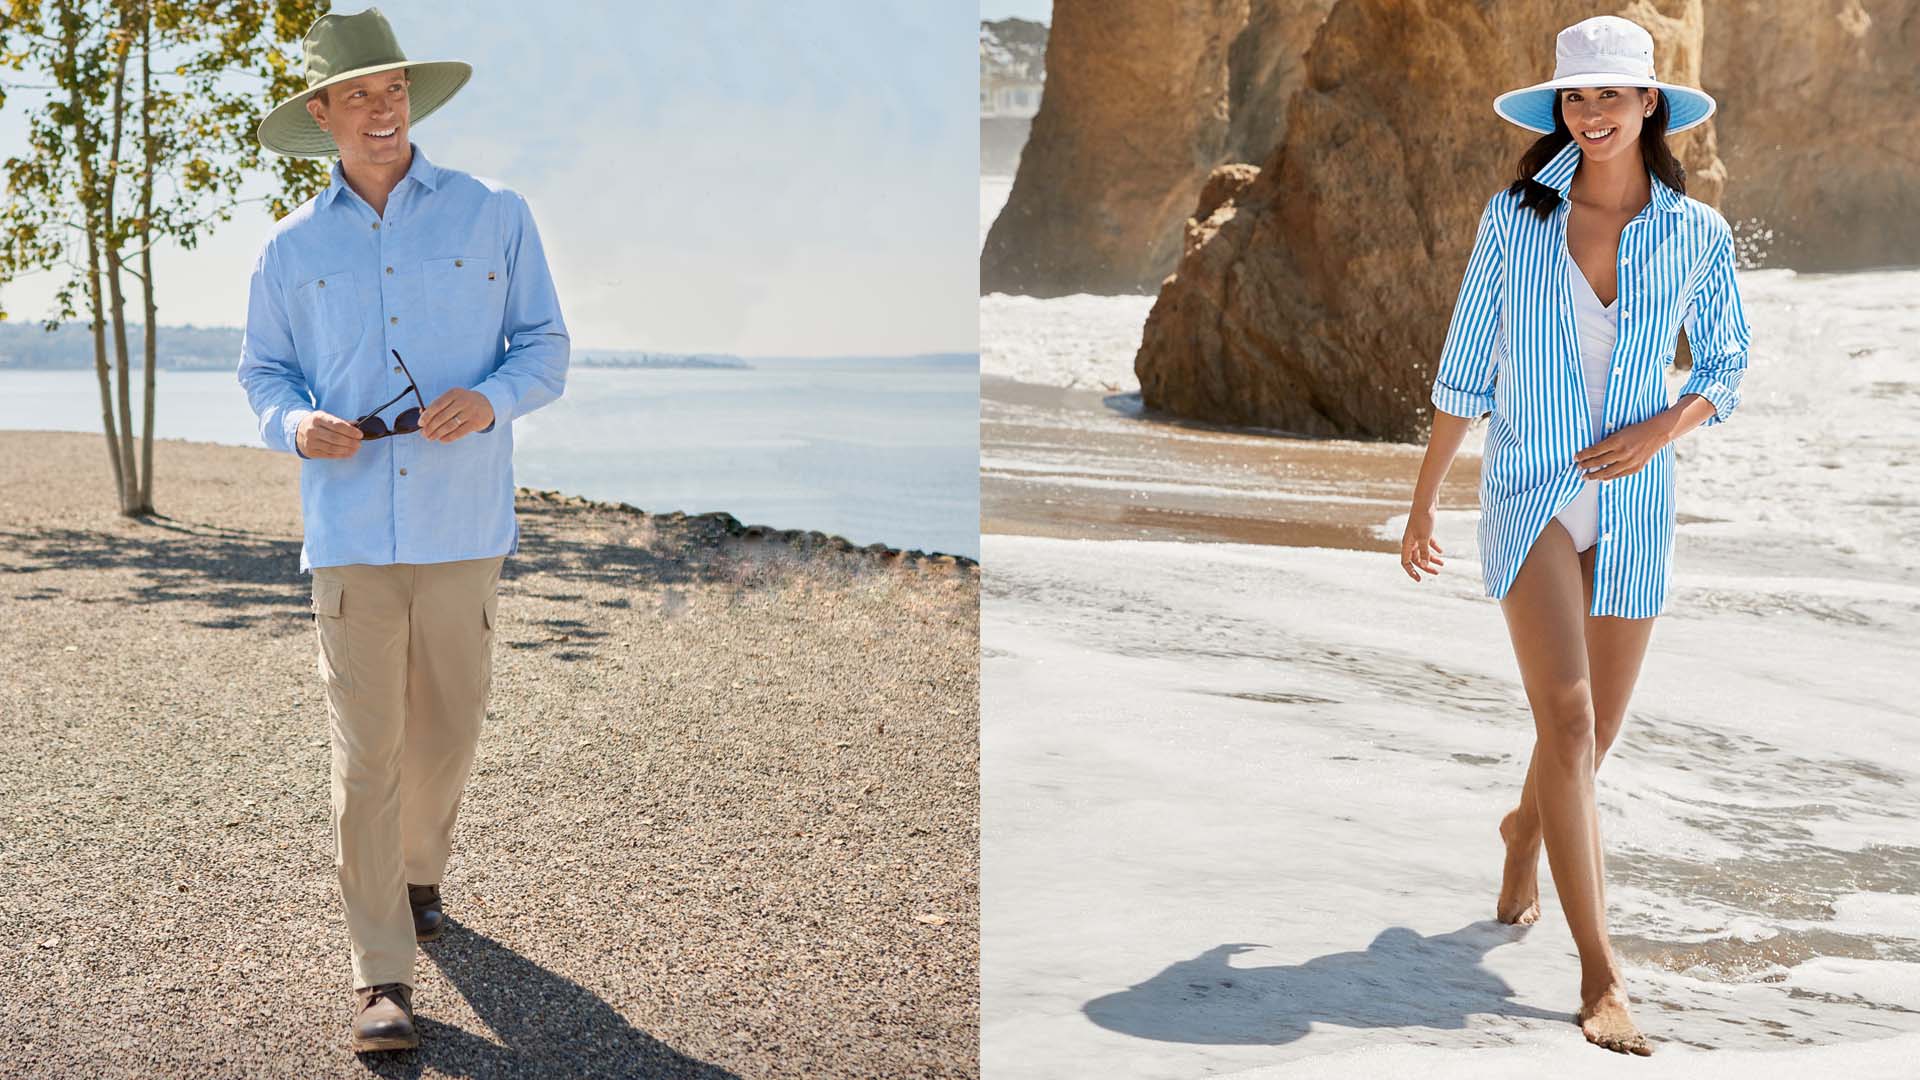 Sun Protective Clothing by Solumbra 100+ SPF Sun Protection Hats, Shirts,  Pants and Accessories